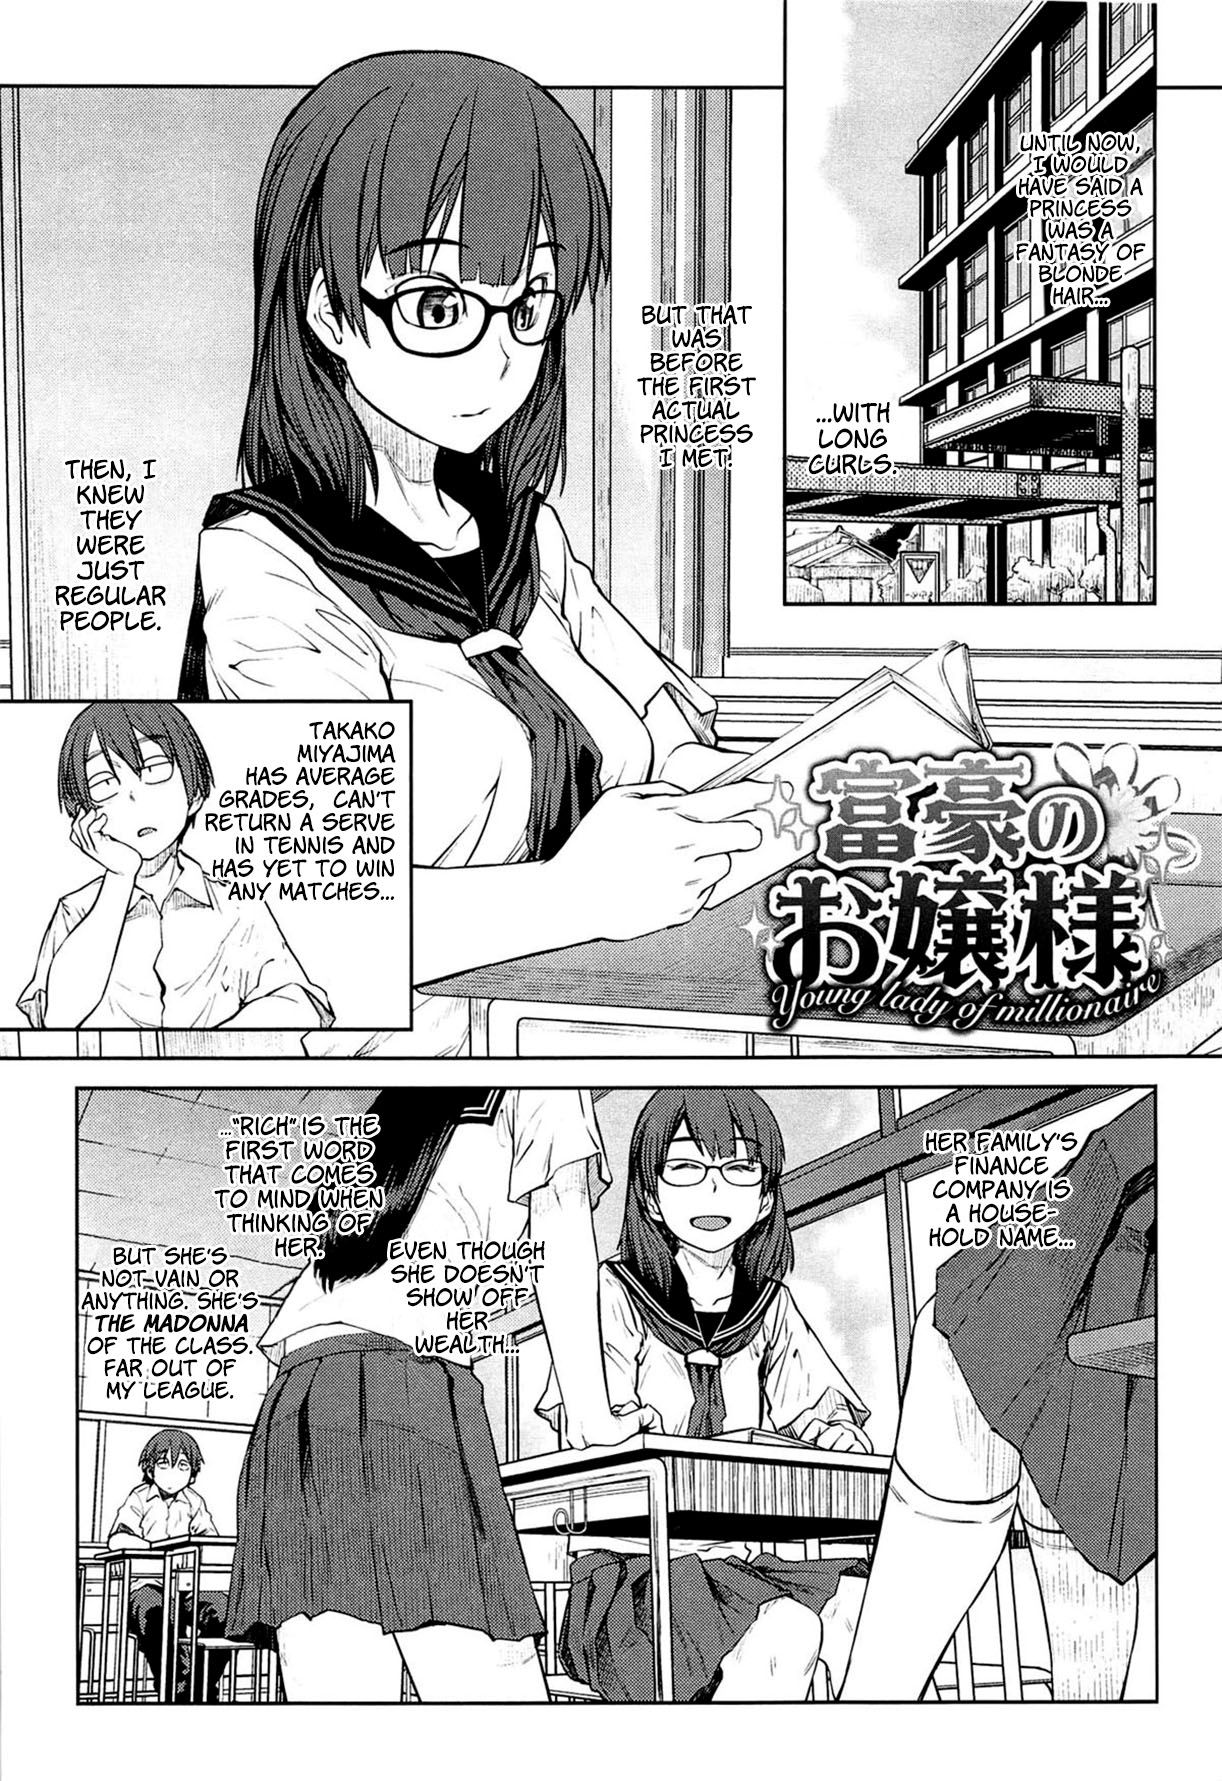 [Shimimaru] QUEENS GAME [English] page 26 full